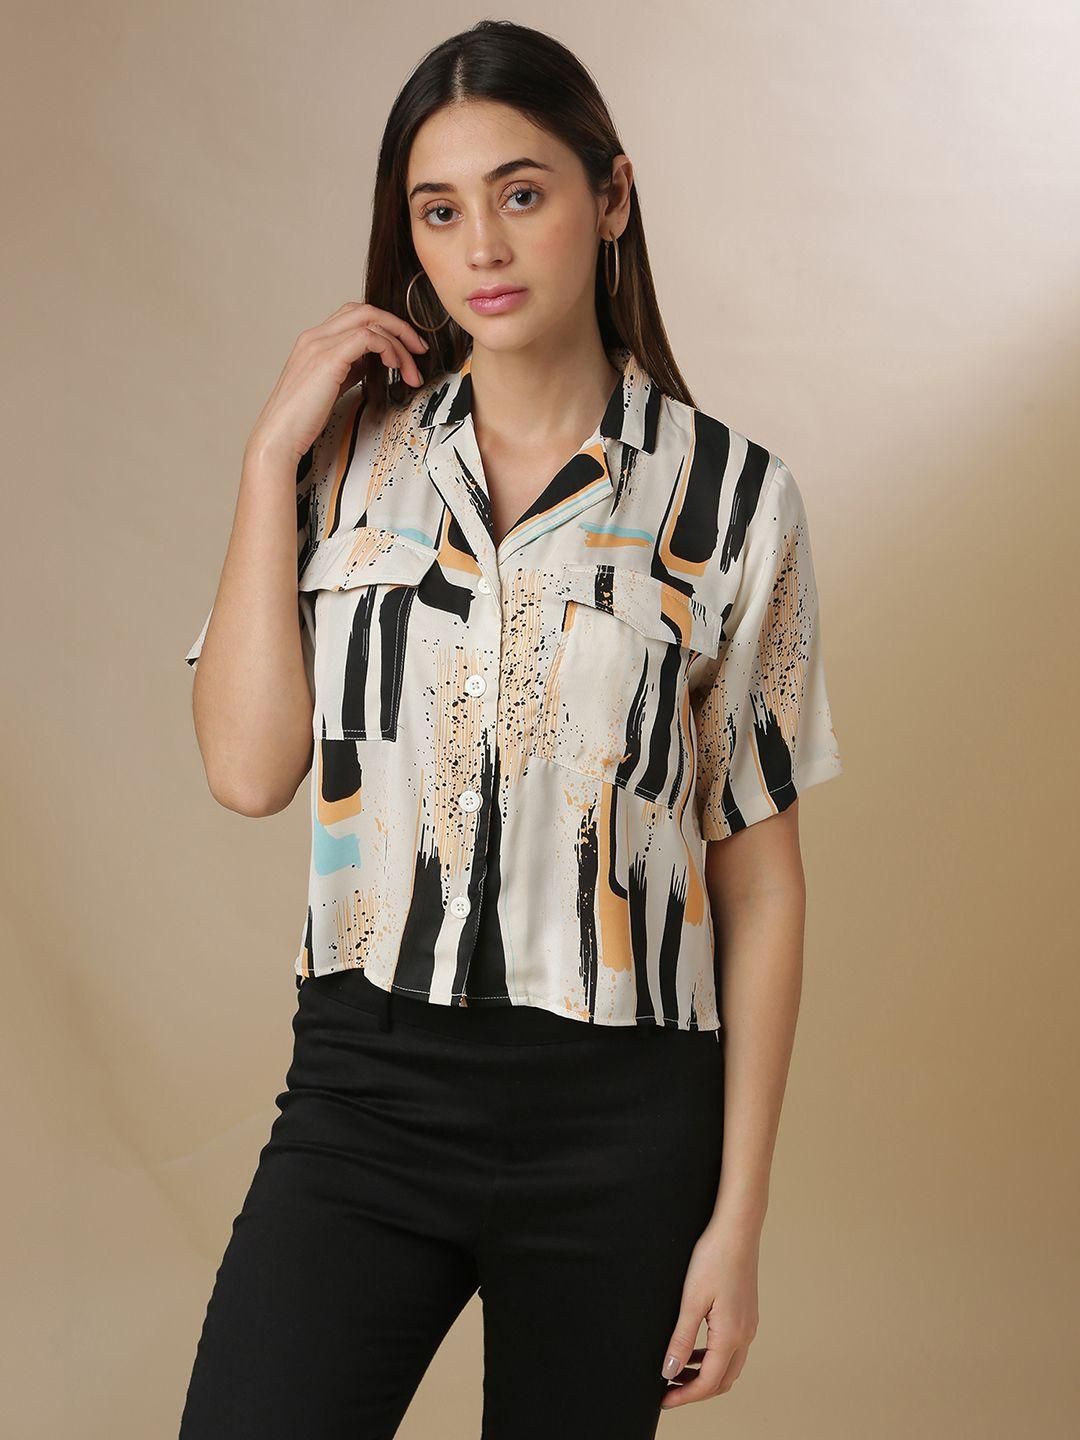 Campus Sutra Women's Printed Shirts